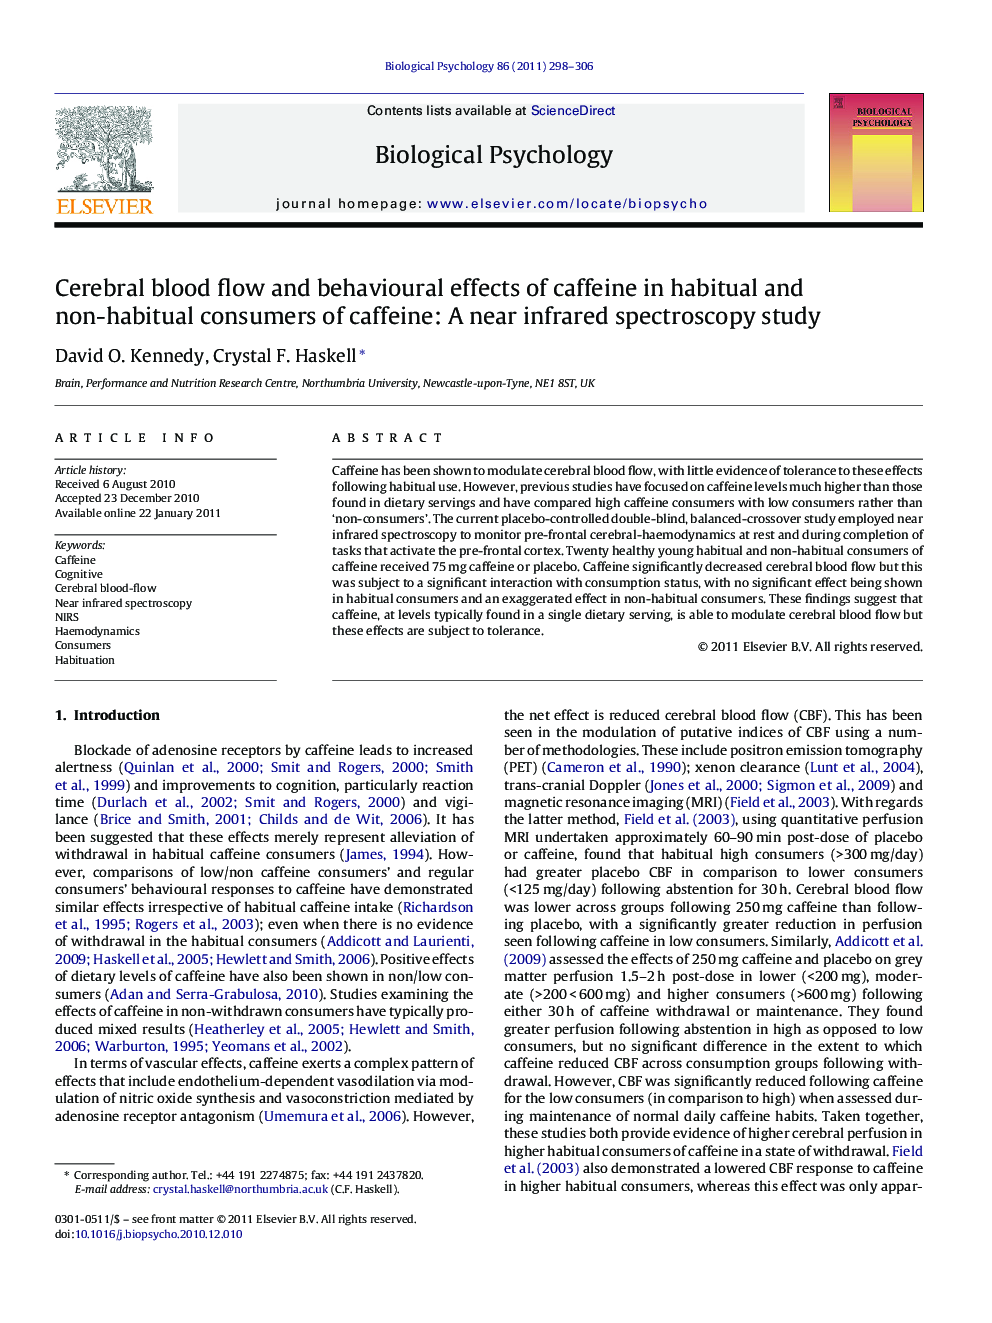 Cerebral blood flow and behavioural effects of caffeine in habitual and non-habitual consumers of caffeine: A near infrared spectroscopy study